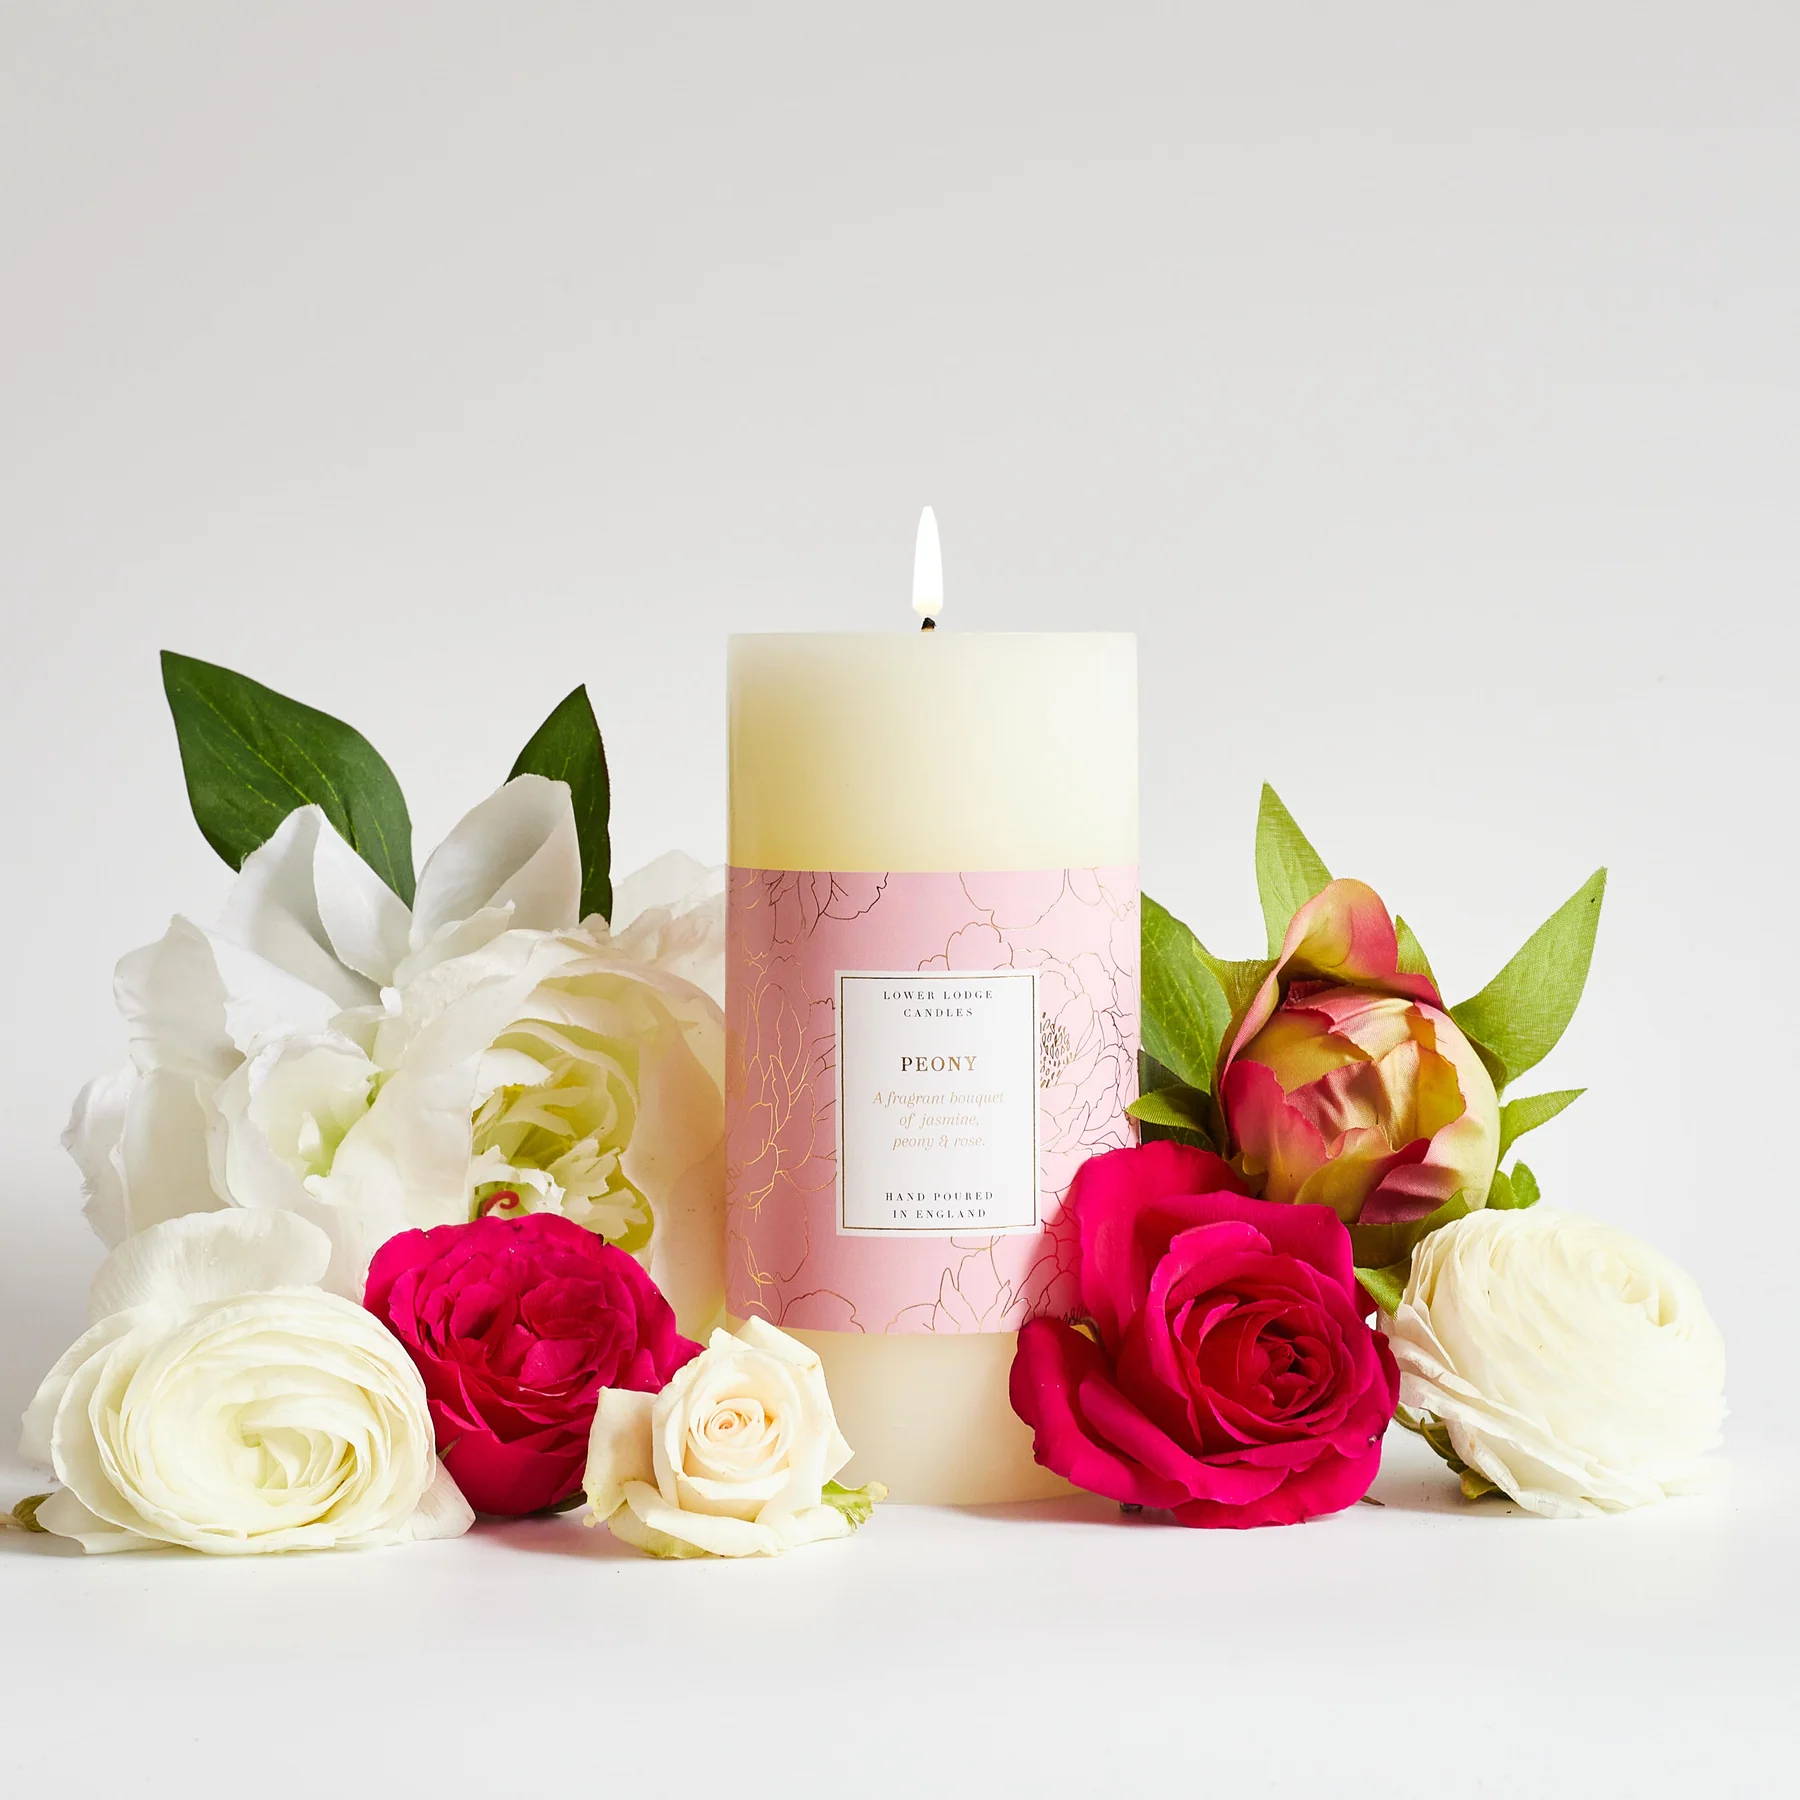 Eucalyptus & Mint Luxury scented candle from Lower Lodge Candles Colour Pop! collection pictured with its cardboard tube packaging against a pastel pink background with eucalyptus leaves